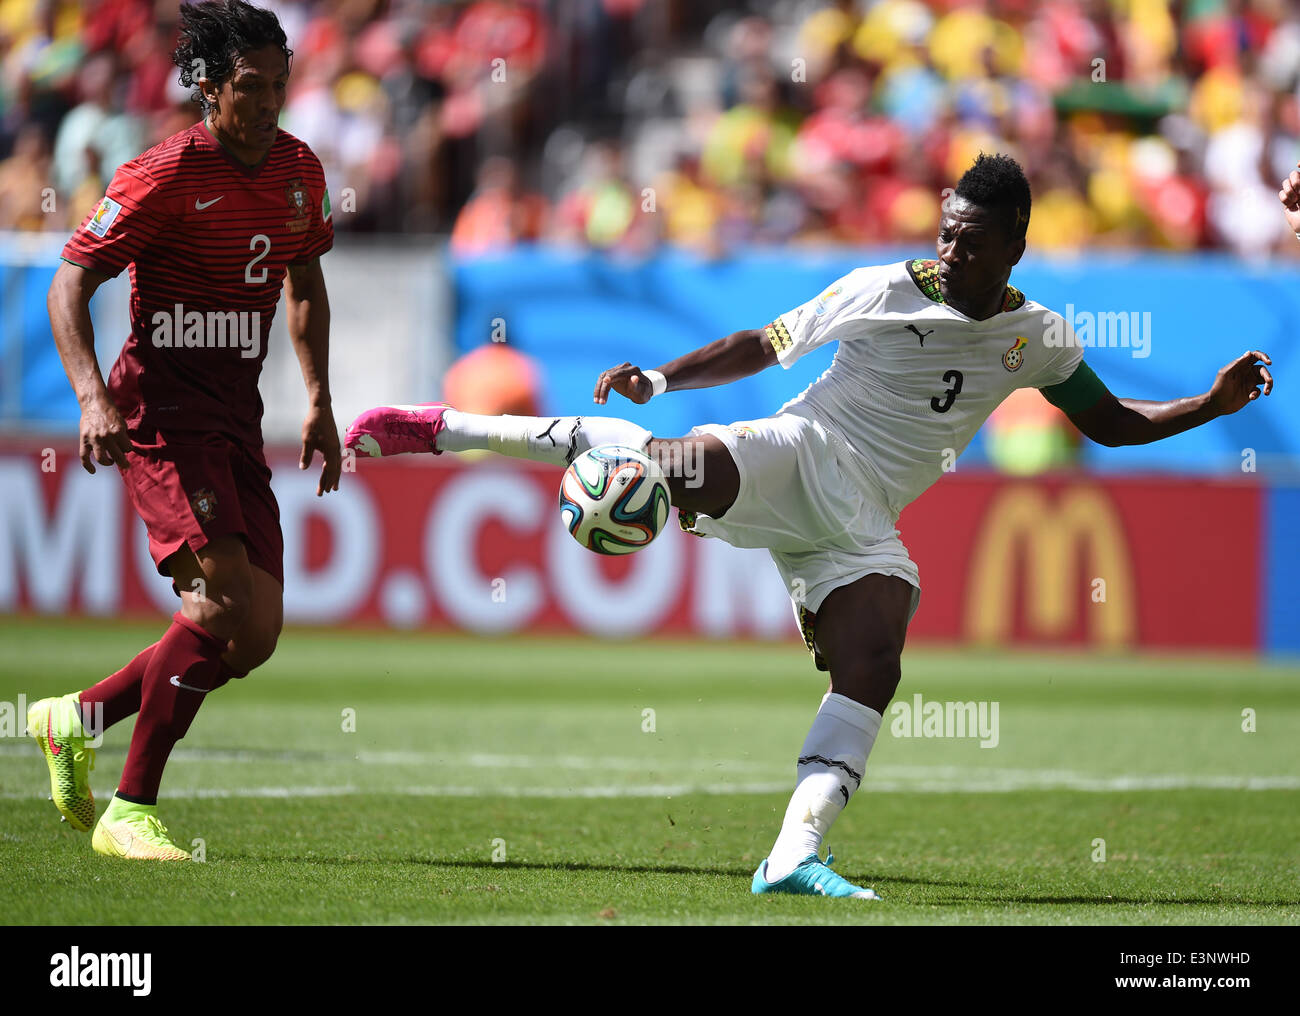 Brasilia, Brazil. 26th June, 2014. Asamoah Gyan (R) of Ghana in action against Bruno Alves of Portugal during the FIFA World Cup 2014 group G preliminary round match between Portugal and Ghana at the Estadio National Stadium in Brasilia, Brazil, on 26 June 2014 Credit: © dpa picture alliance/Alamy Live News  Stock Photo